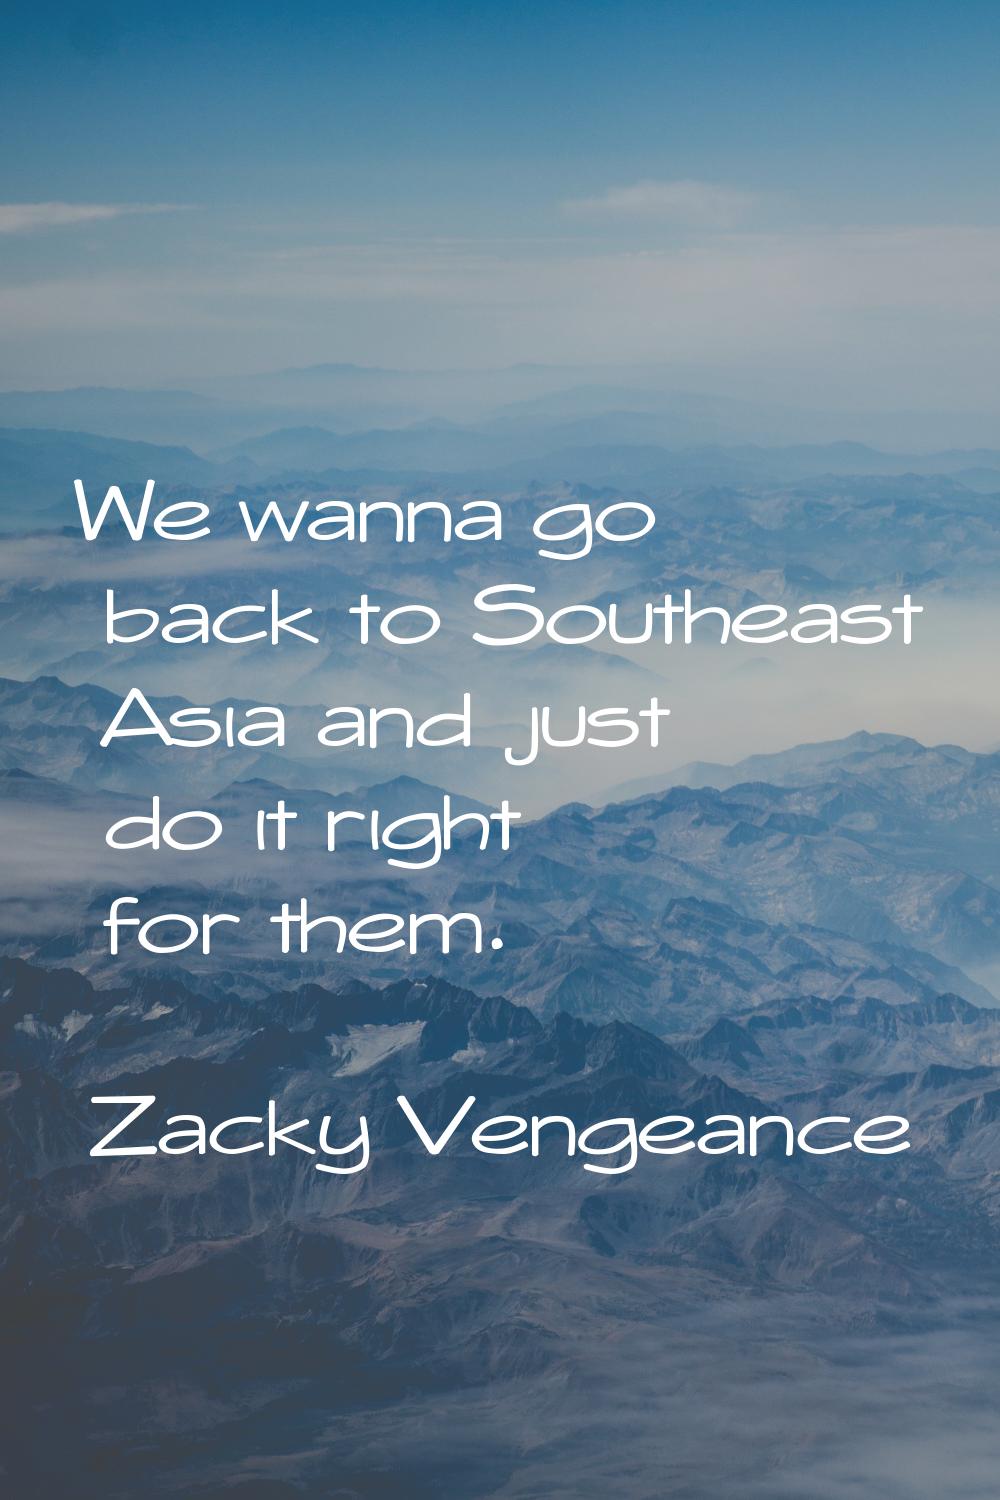 We wanna go back to Southeast Asia and just do it right for them.